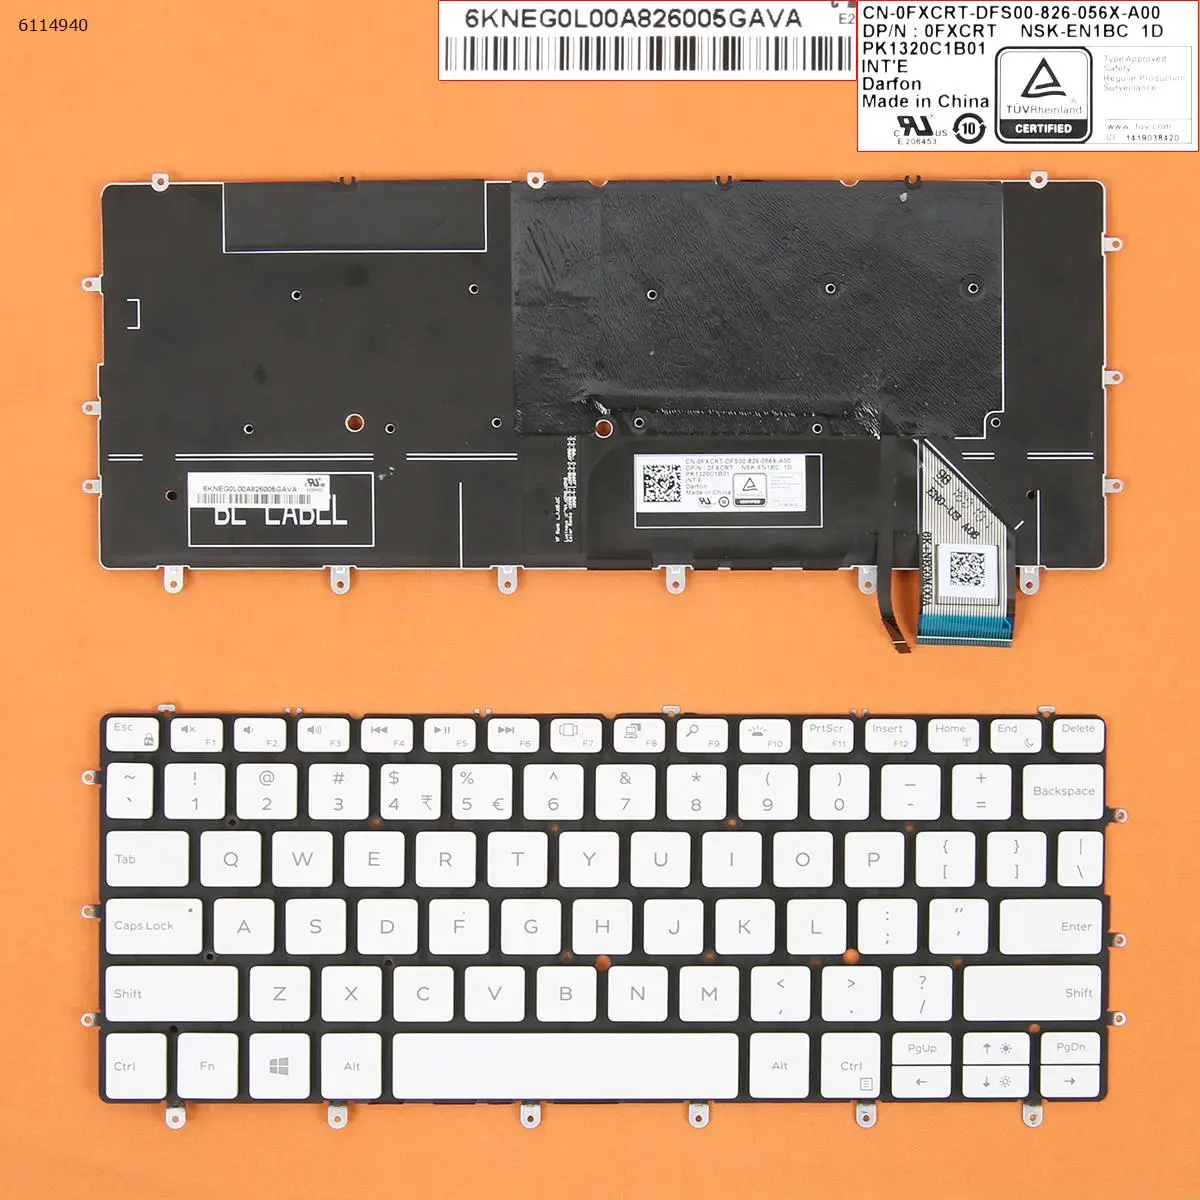 

US New Keyboard for Dell XPS 13 9370 9380 Laptop PK132CR2B01 0K2NCP 0RMCR1 DLM17B23USJ6981 White with Backlit NO Frame